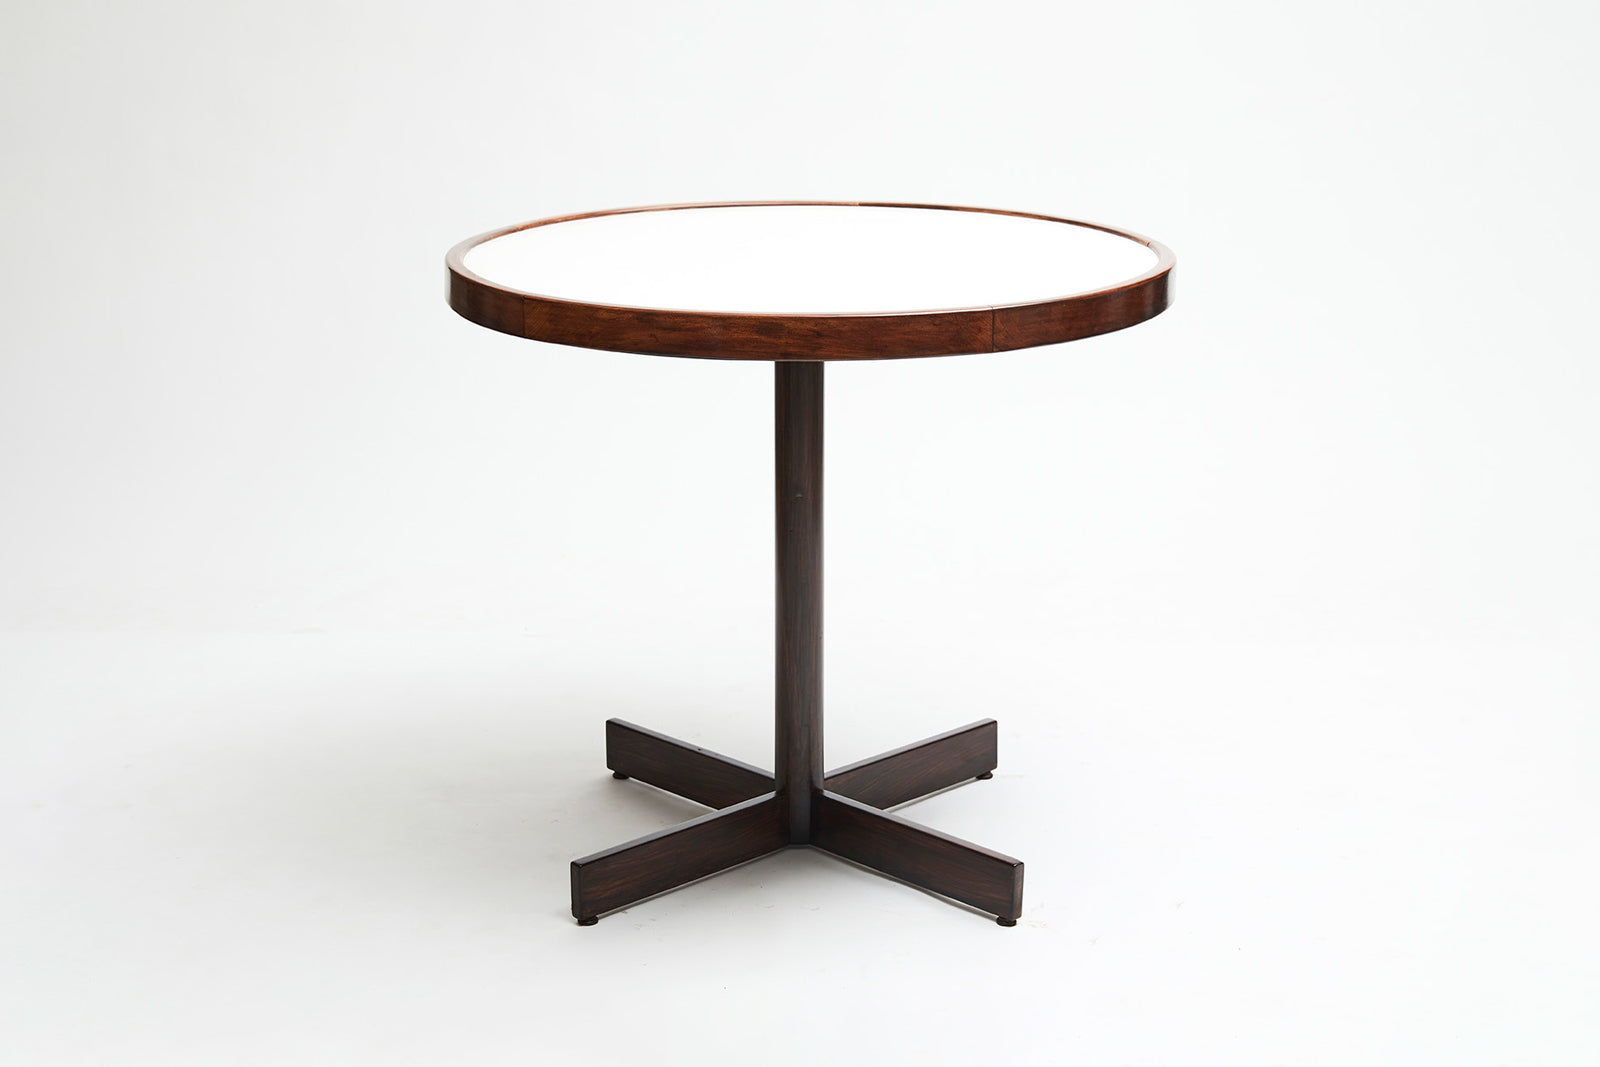 Round Cocktail Table by Jorge Zalszupin, c. 1970s - Lot 27